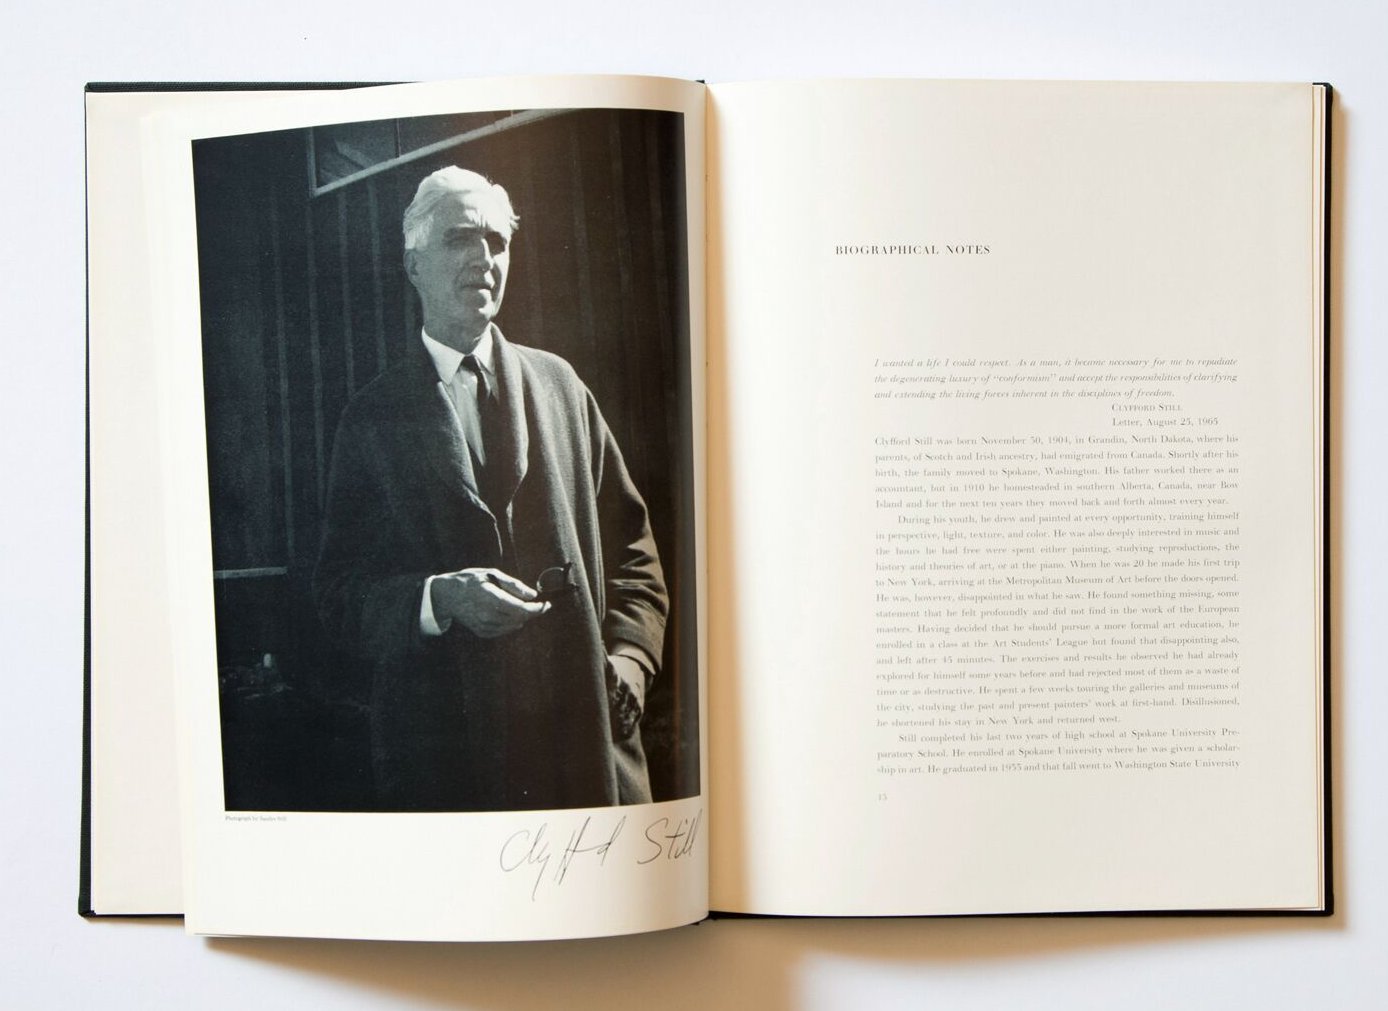 Inside page from ‘Albright-Knox Art Gallery Still Catalog’ featuring Biographical Notes and a photograph of Clyfford Still. 